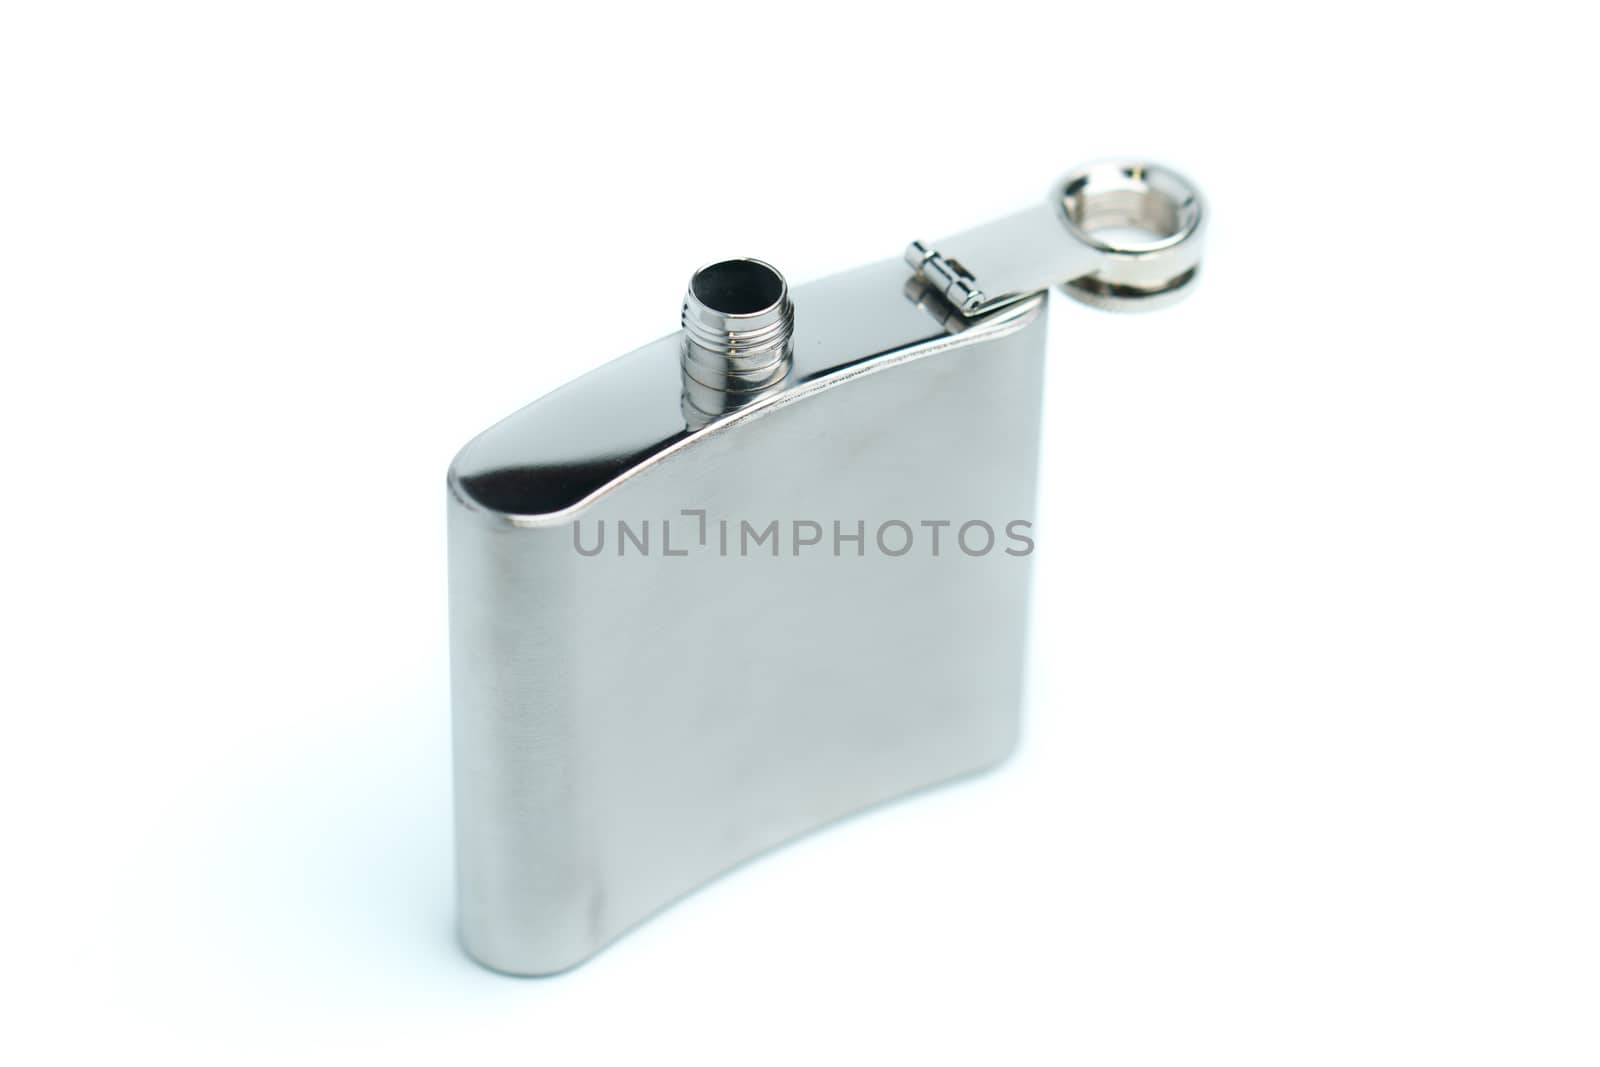 Stainless hip flask isolated on a white background